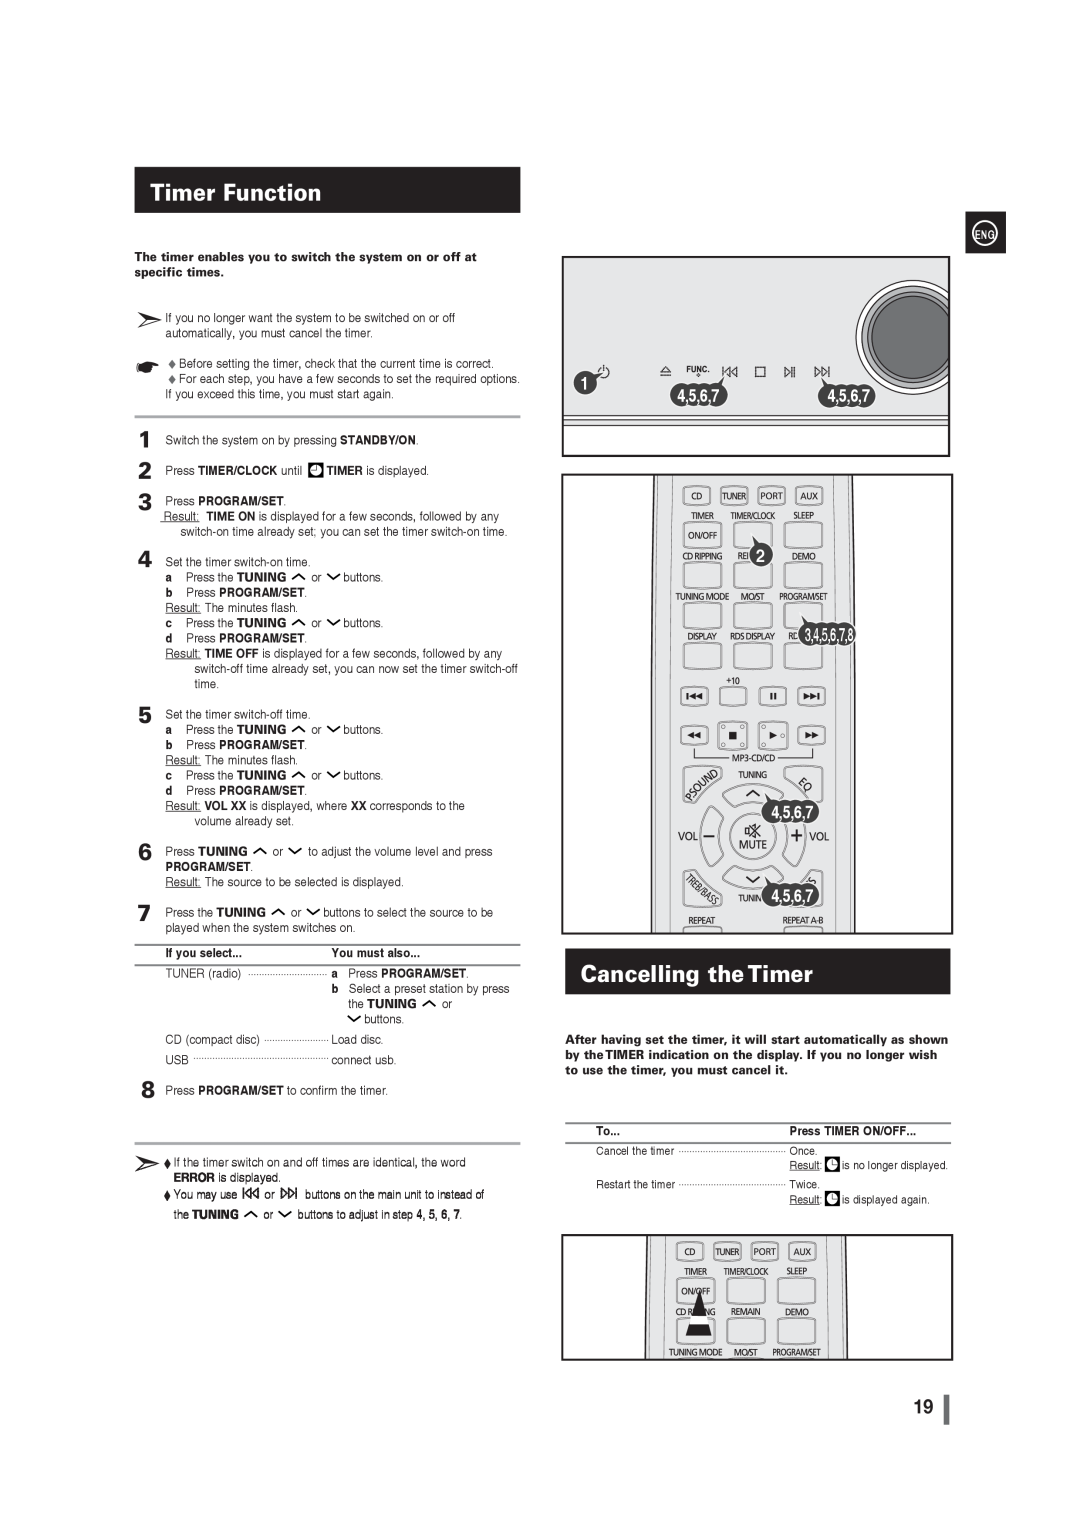 Samsung MM-G35 user manual Timer Function, Cancelling the Timer, 2 3,4,5,6,7,8 4,5,6,7 4,5,6,7 